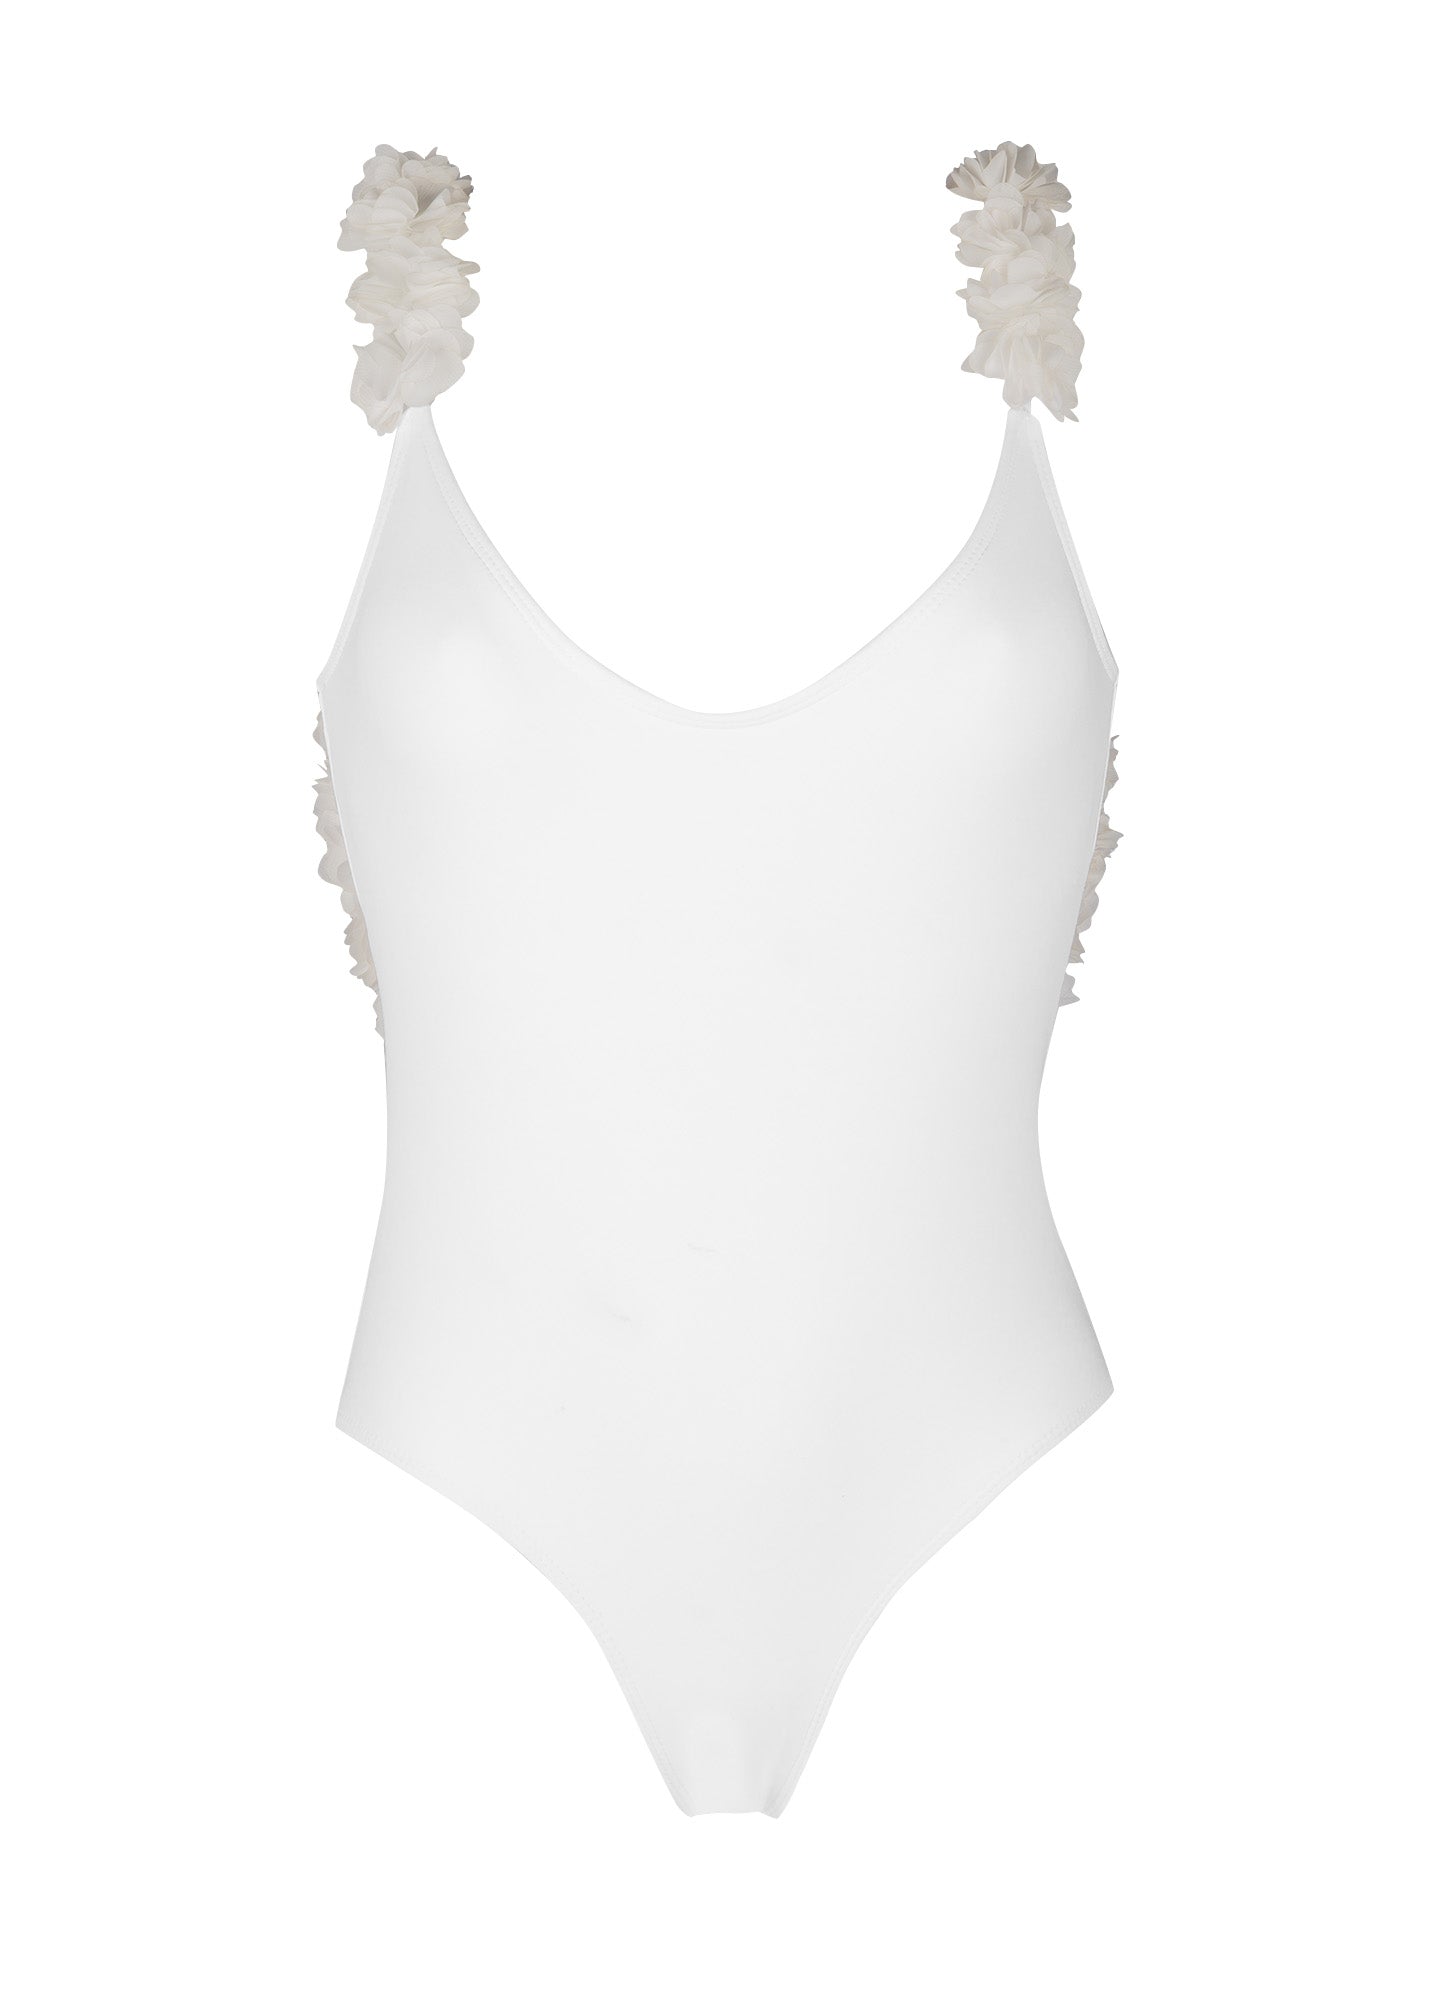 backless one-piece swimsuit with chiffon flowers in color white